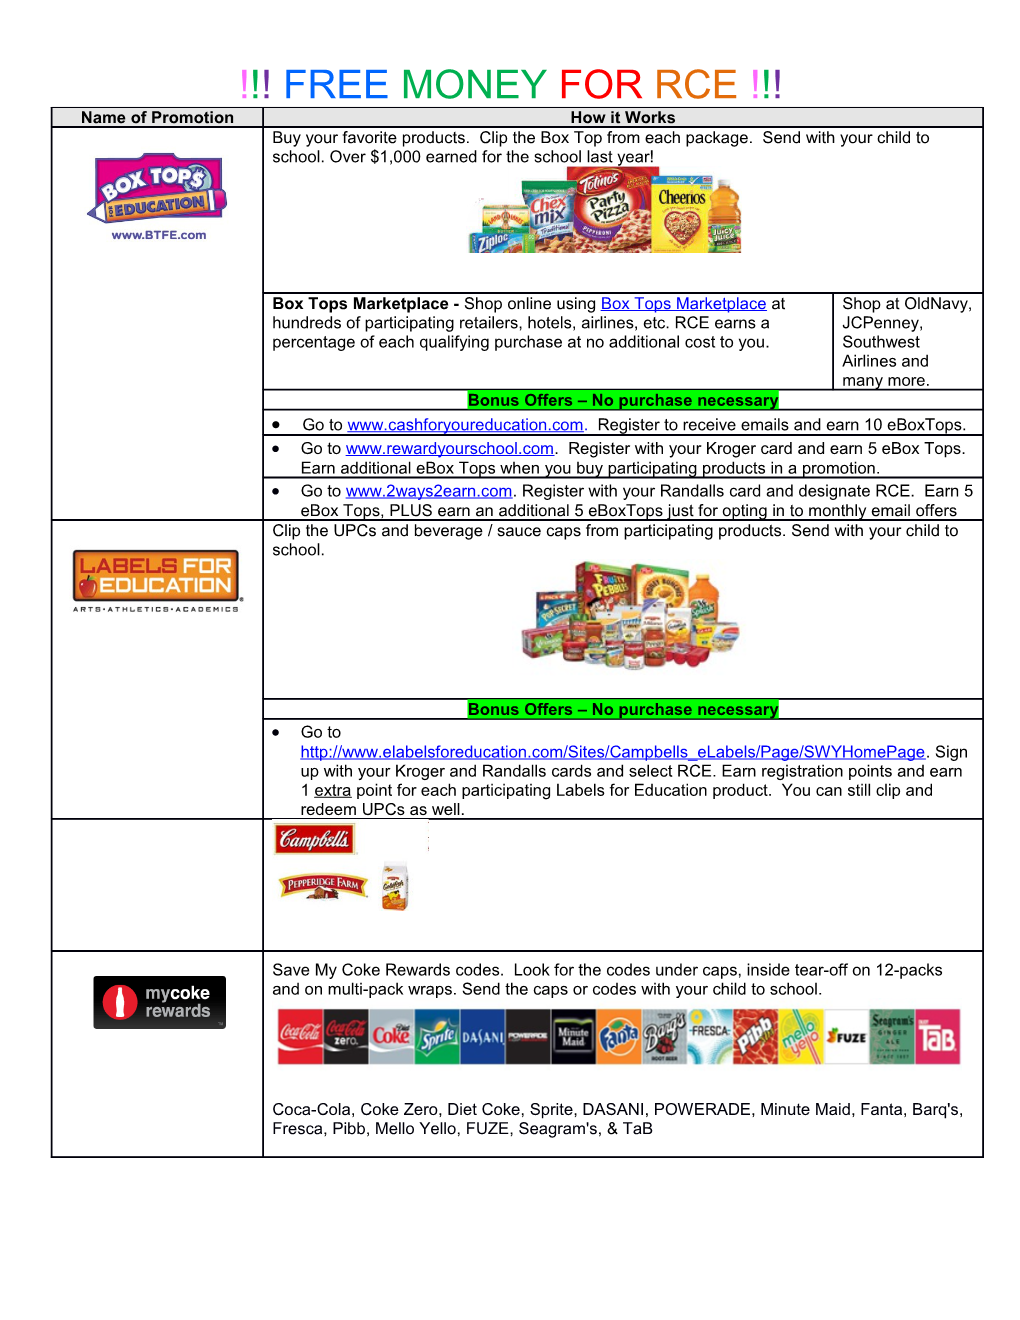 Go to Register to Receive Emails and Earn 10 Eboxtops